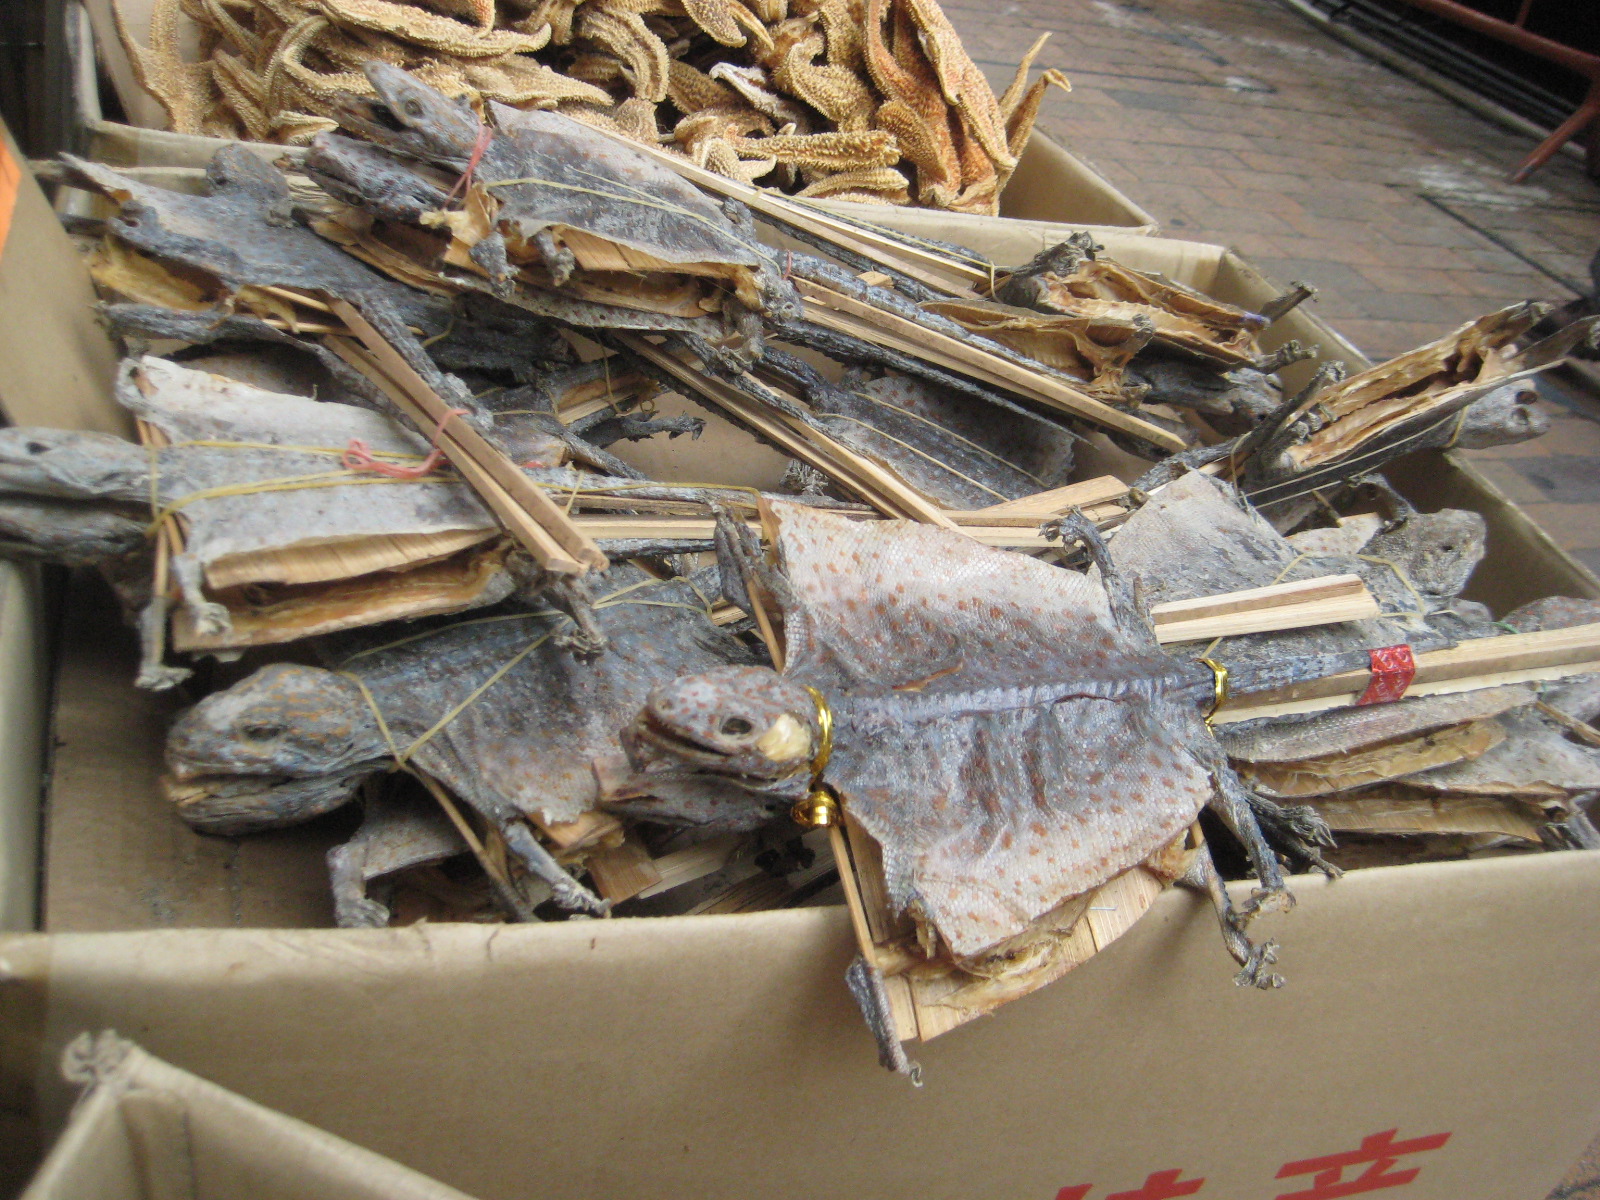 These_Dried_Lizards_Are_Used_for_Stew.JPG